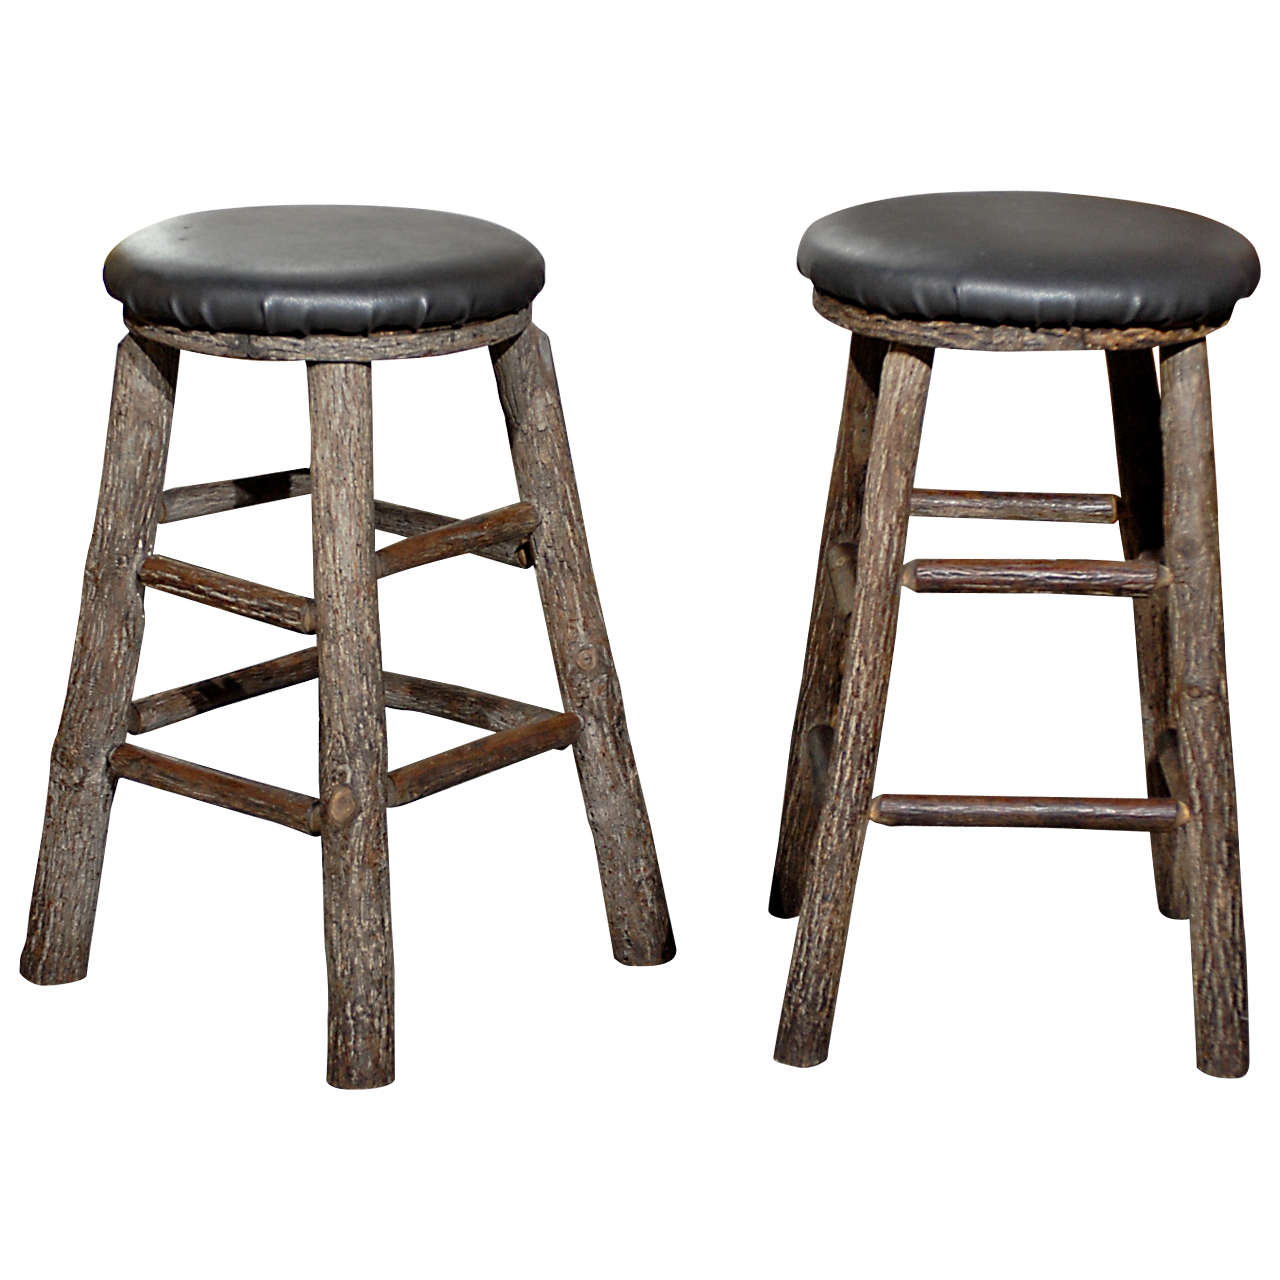 10 Round Rustic Vintage Bar Stools with Tree Logs Legs from the 20th  Century For Sale at 1stDibs | old bar stools, round stools, vintage stools